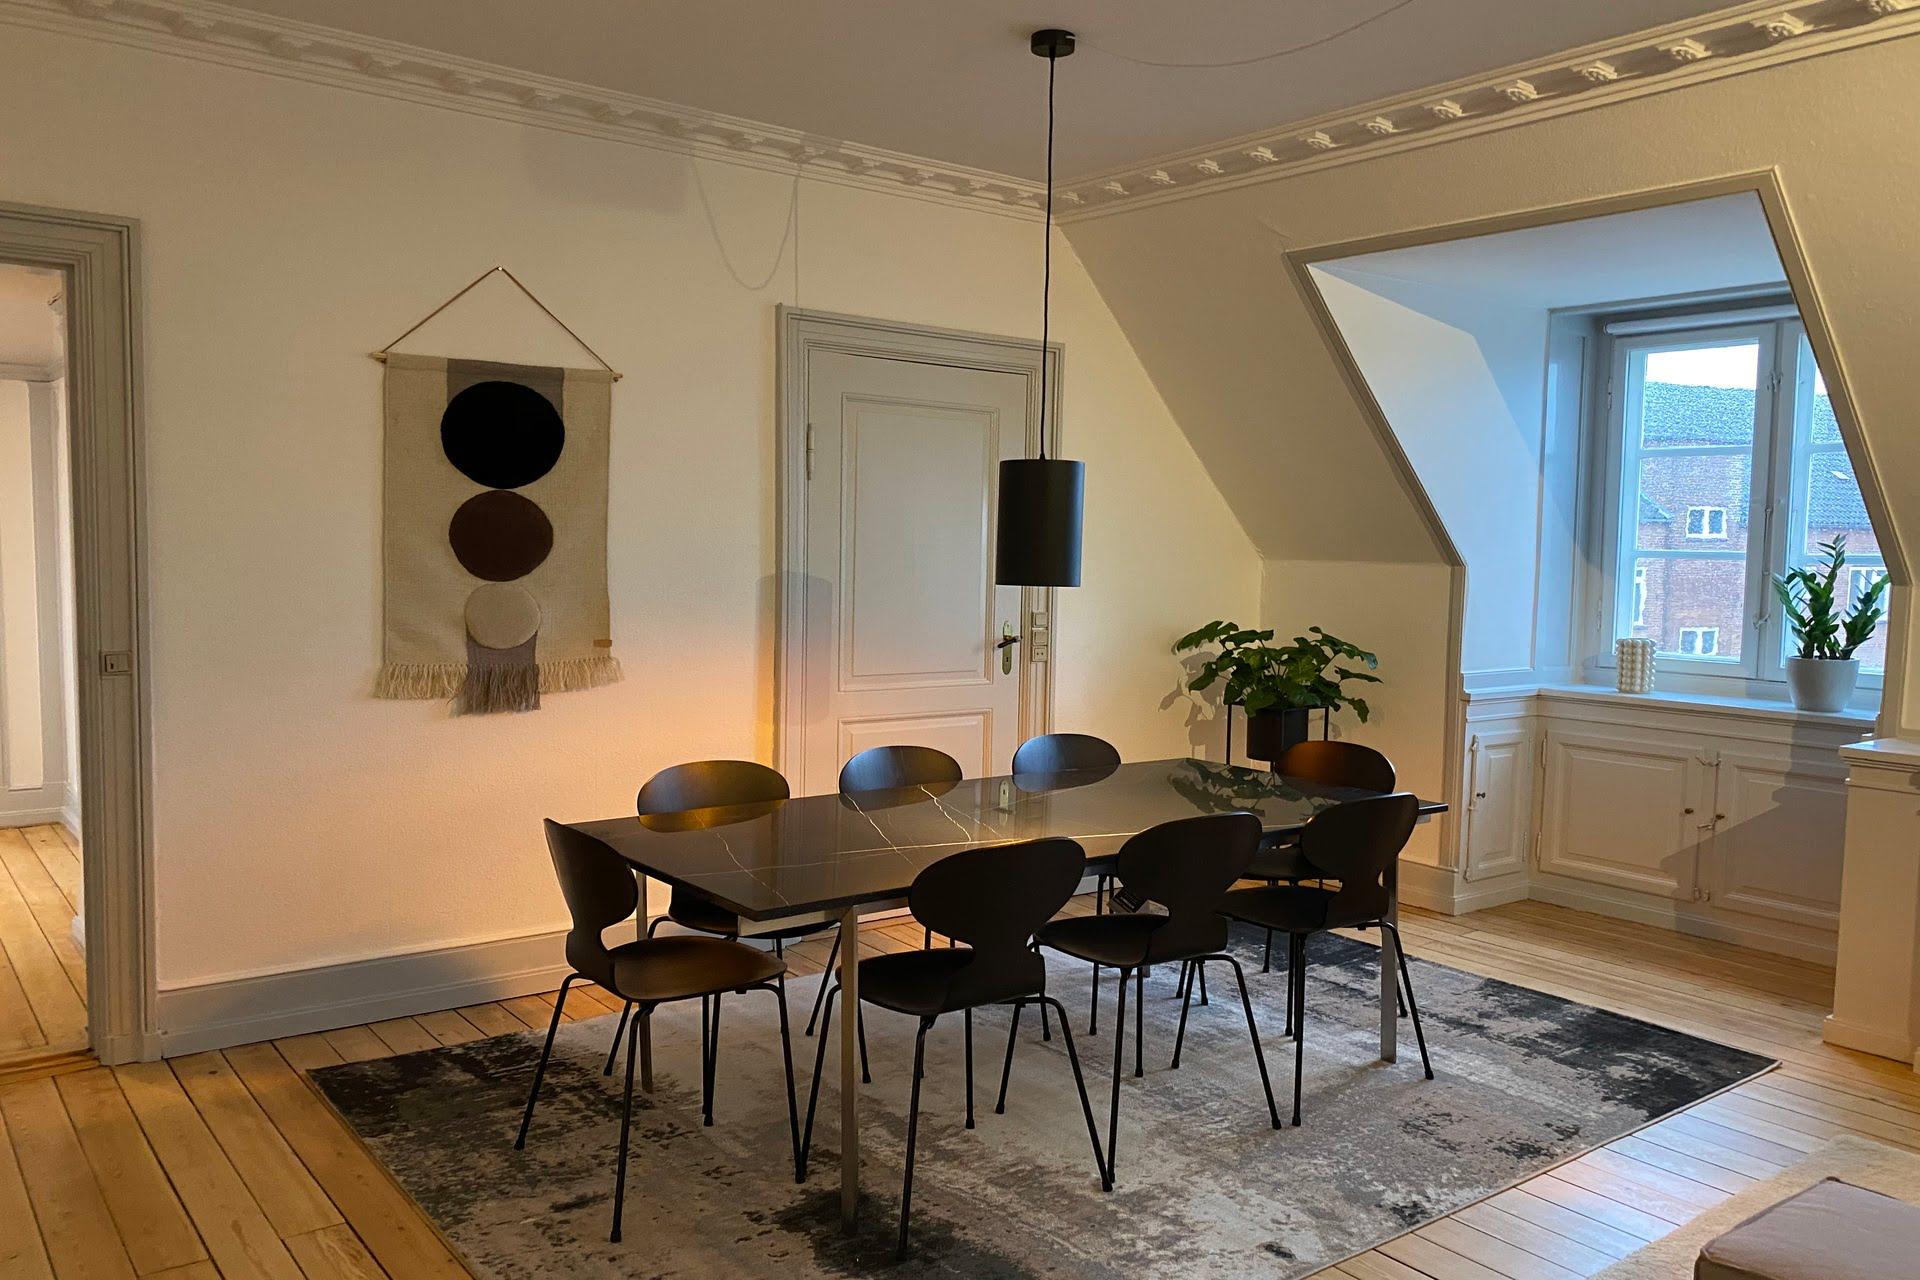 A dining area of one of the Movinn Coliving apartments